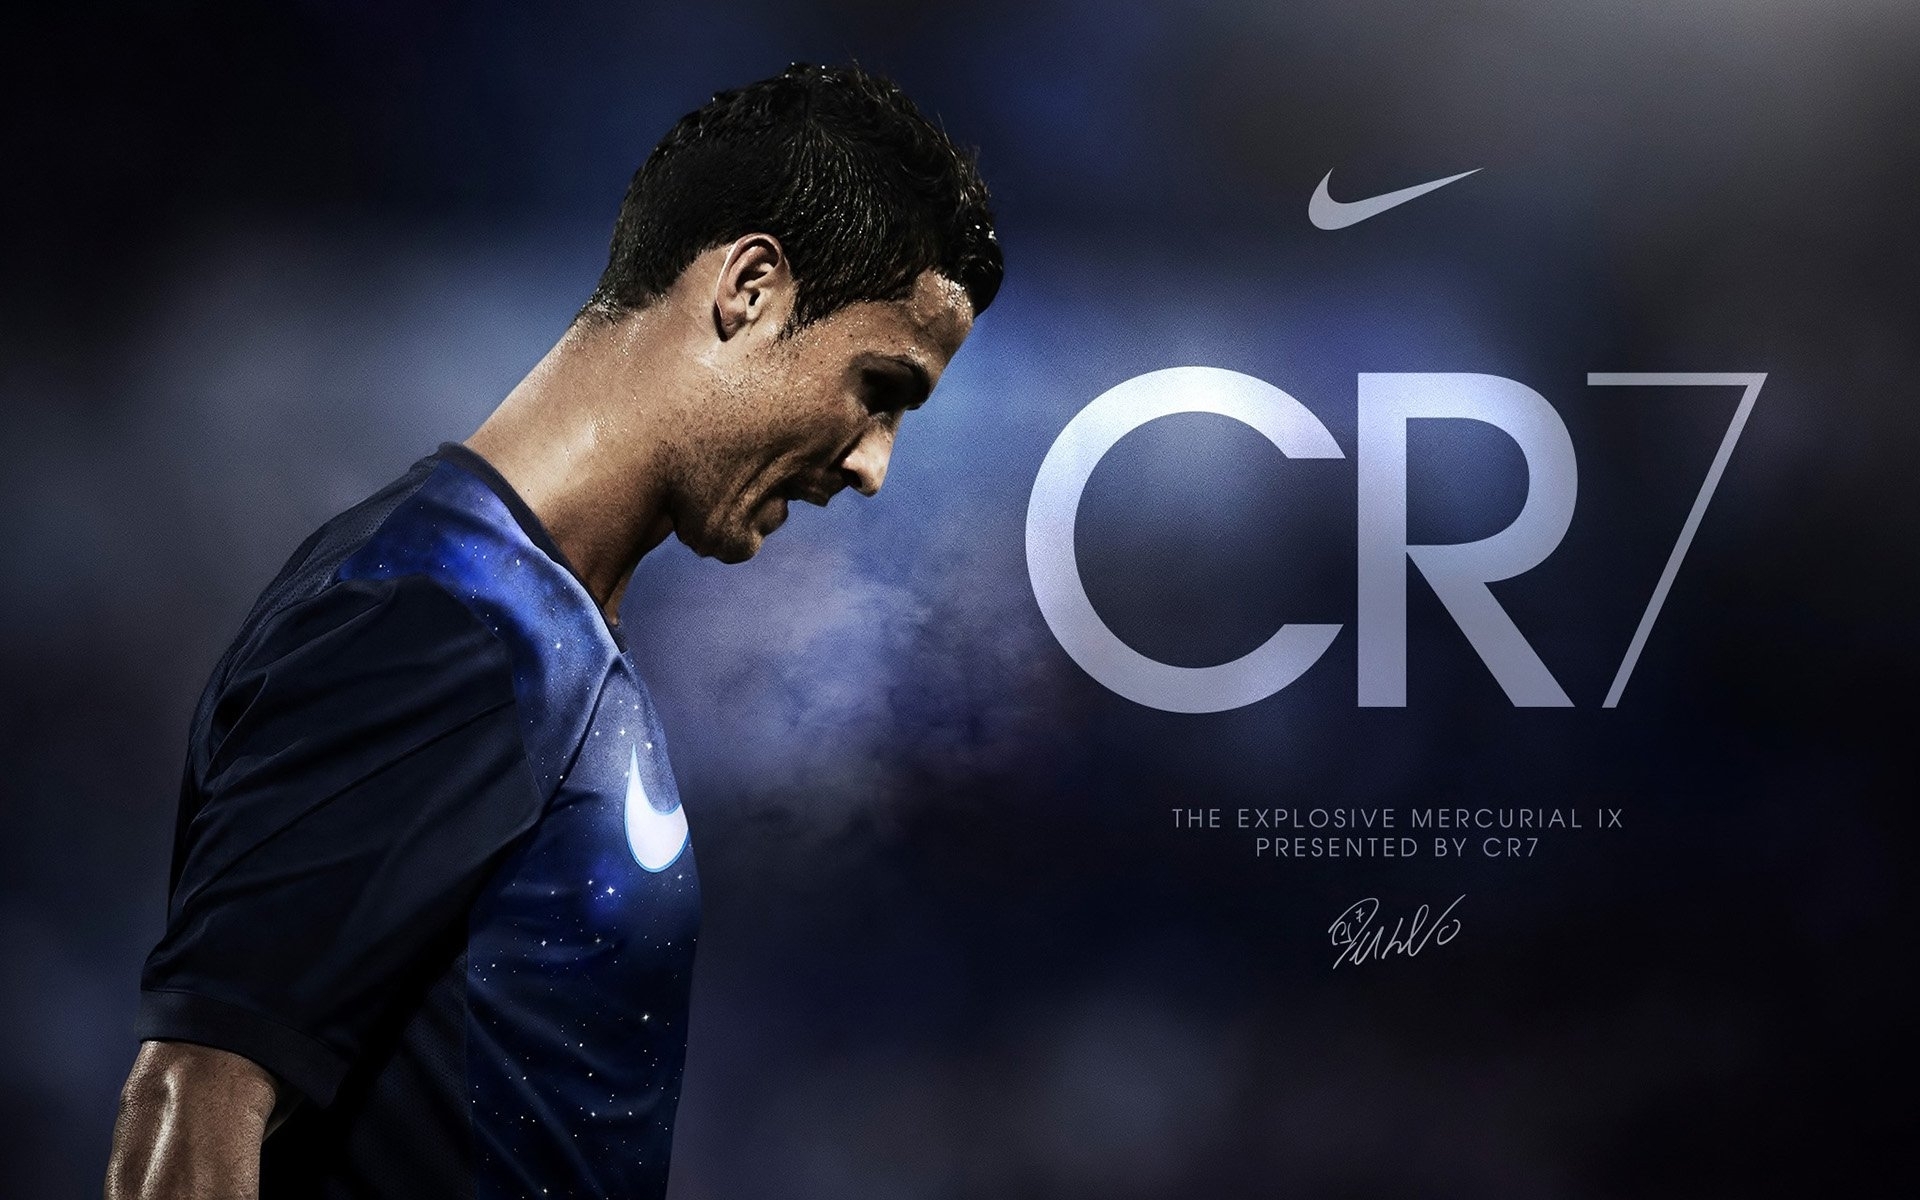 10 Top Cristiano Ronaldo Hd Wallpapers FULL HD 1920×1080 For PC Background